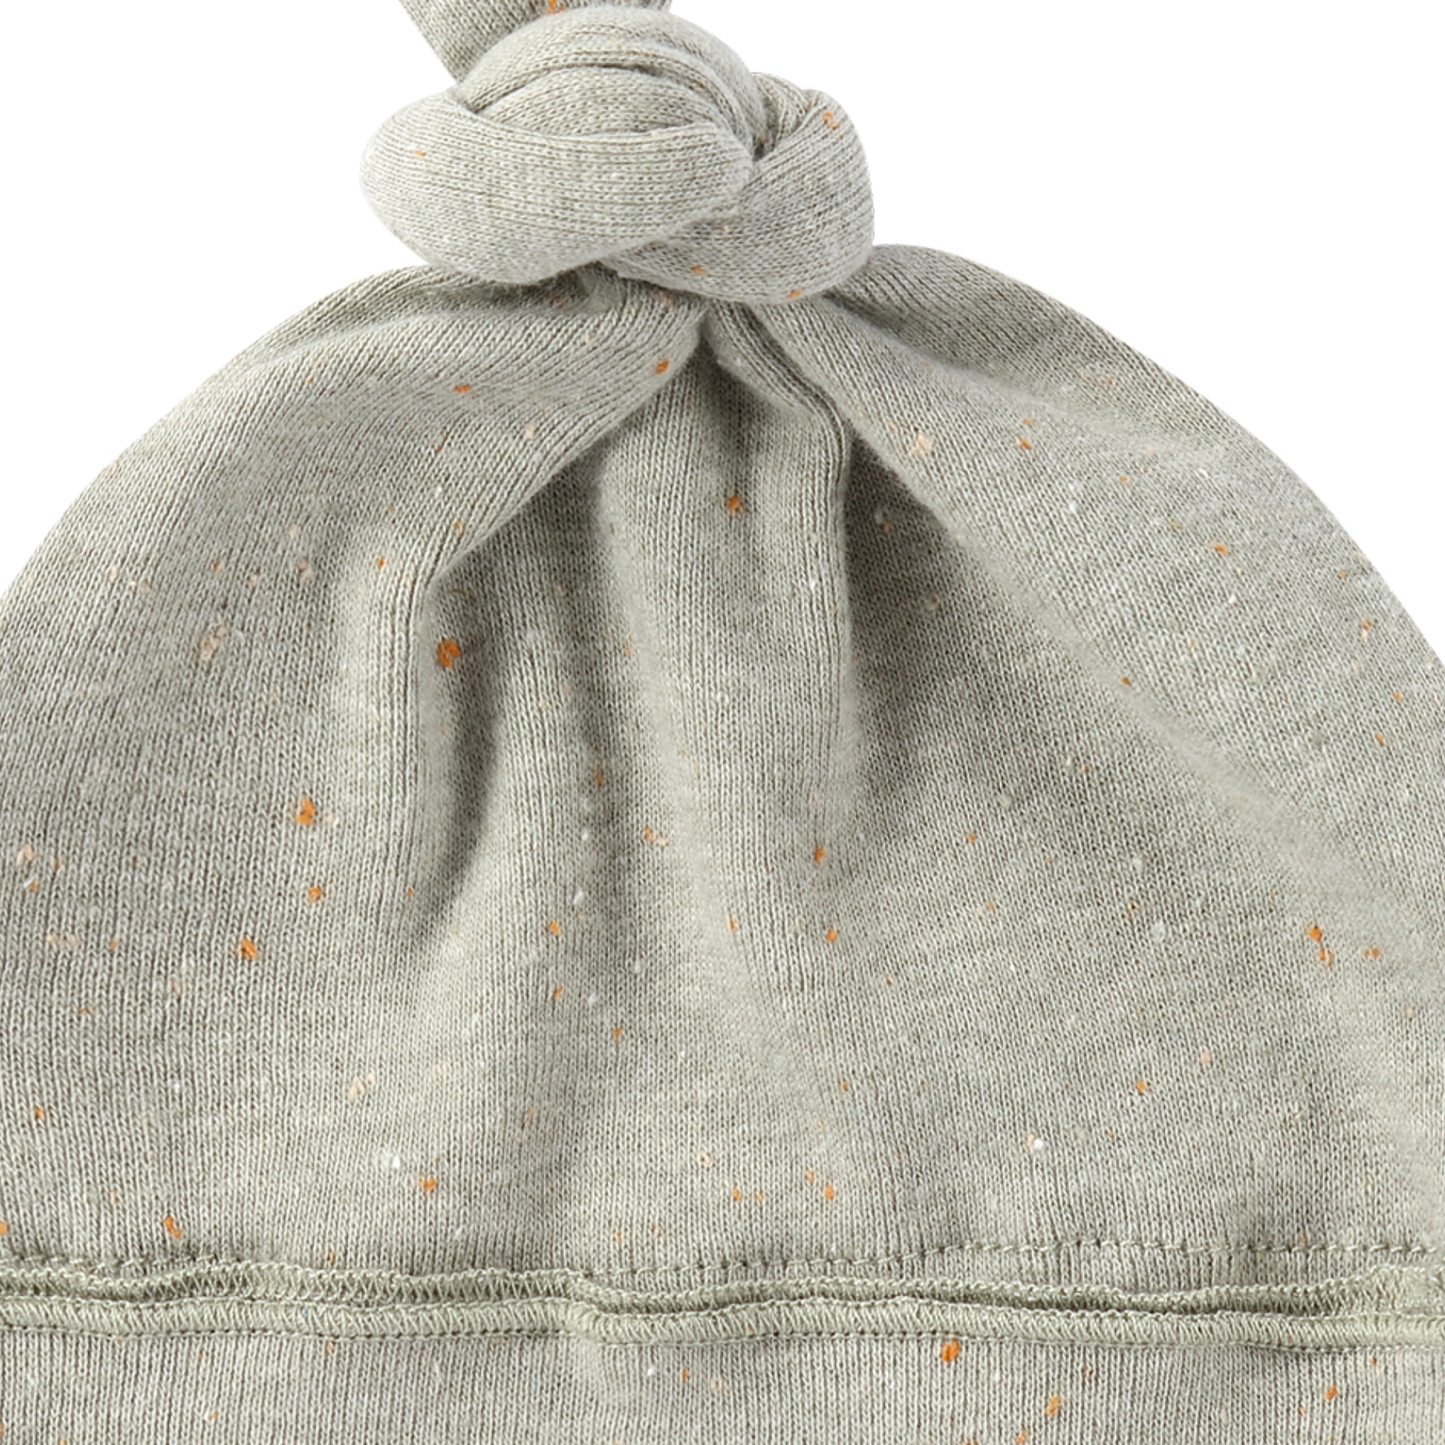 Organic Knotted Hat - Sage Speckled